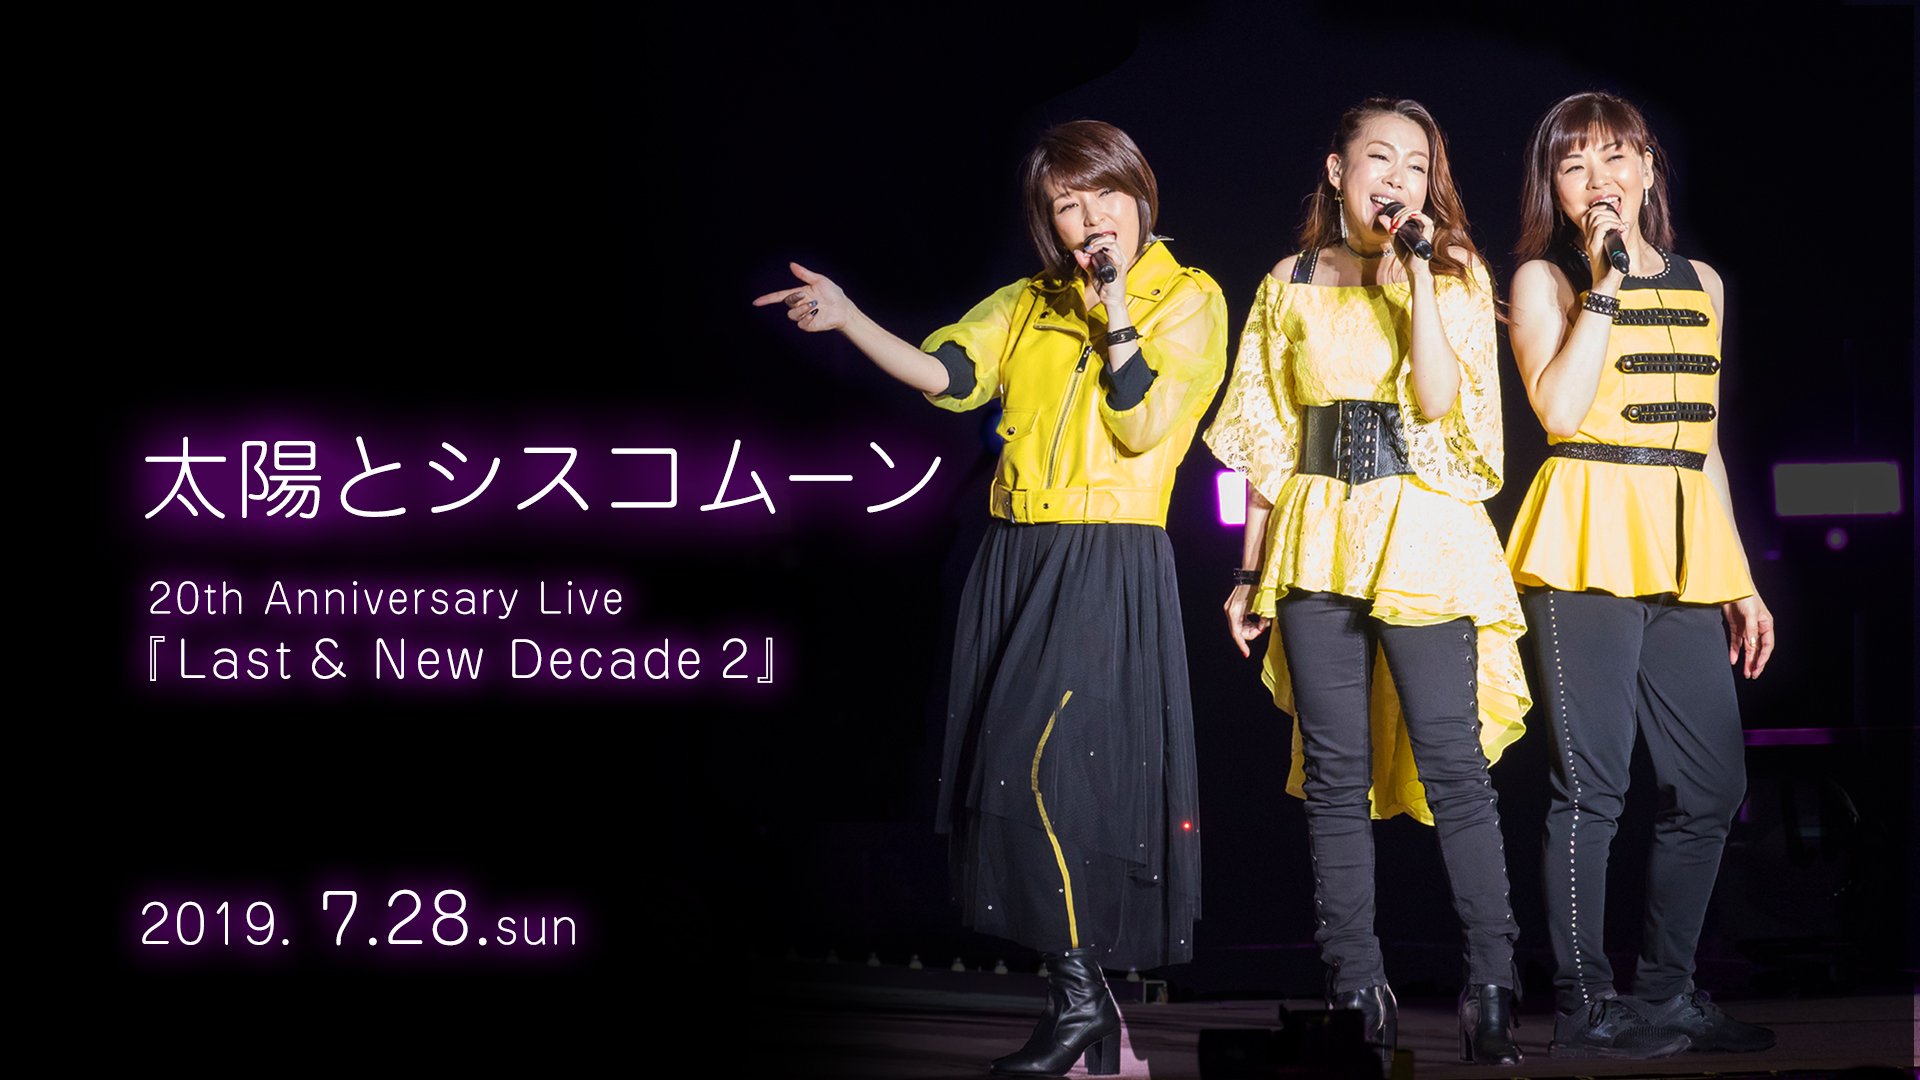 Taiyou to Ciscomoon 20th Anniversary Live Last & New Decade 2